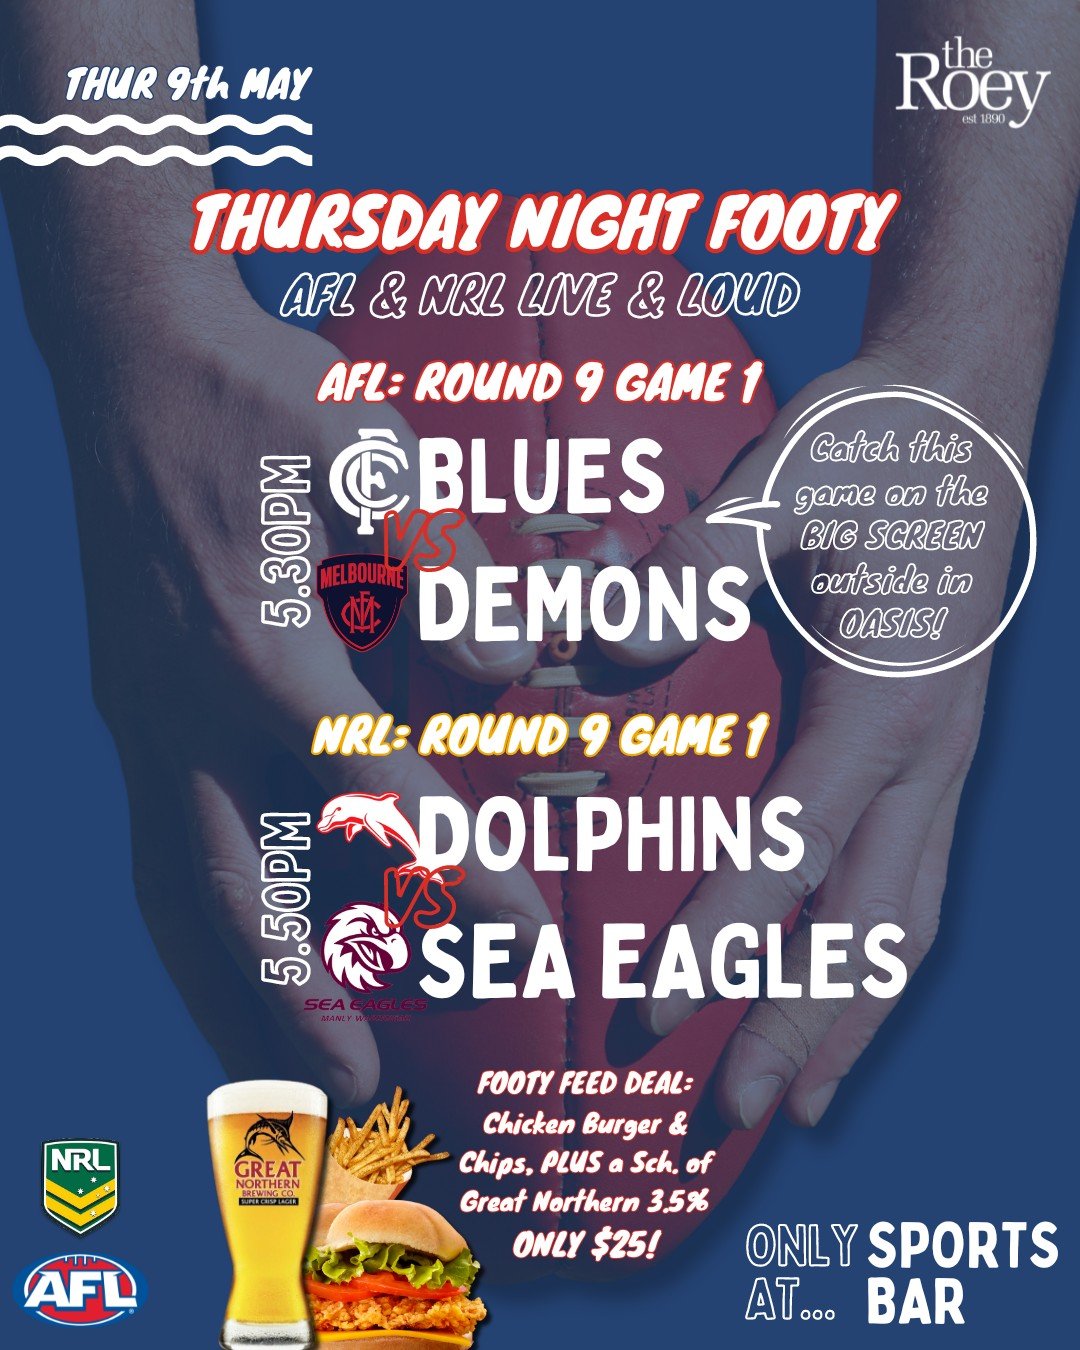 It's THURSDAY... so you know what that means 😜 
...time for a little Friday behaviour! 

Kicking off with THURSDAY NIGHT FOOTY! Both codes live &amp; loud on the big screens in the Sports Bar

AFL 🏉 Blues vs Demons @ 5.30pm
NRL 🏉 Dolphins vs Sea E